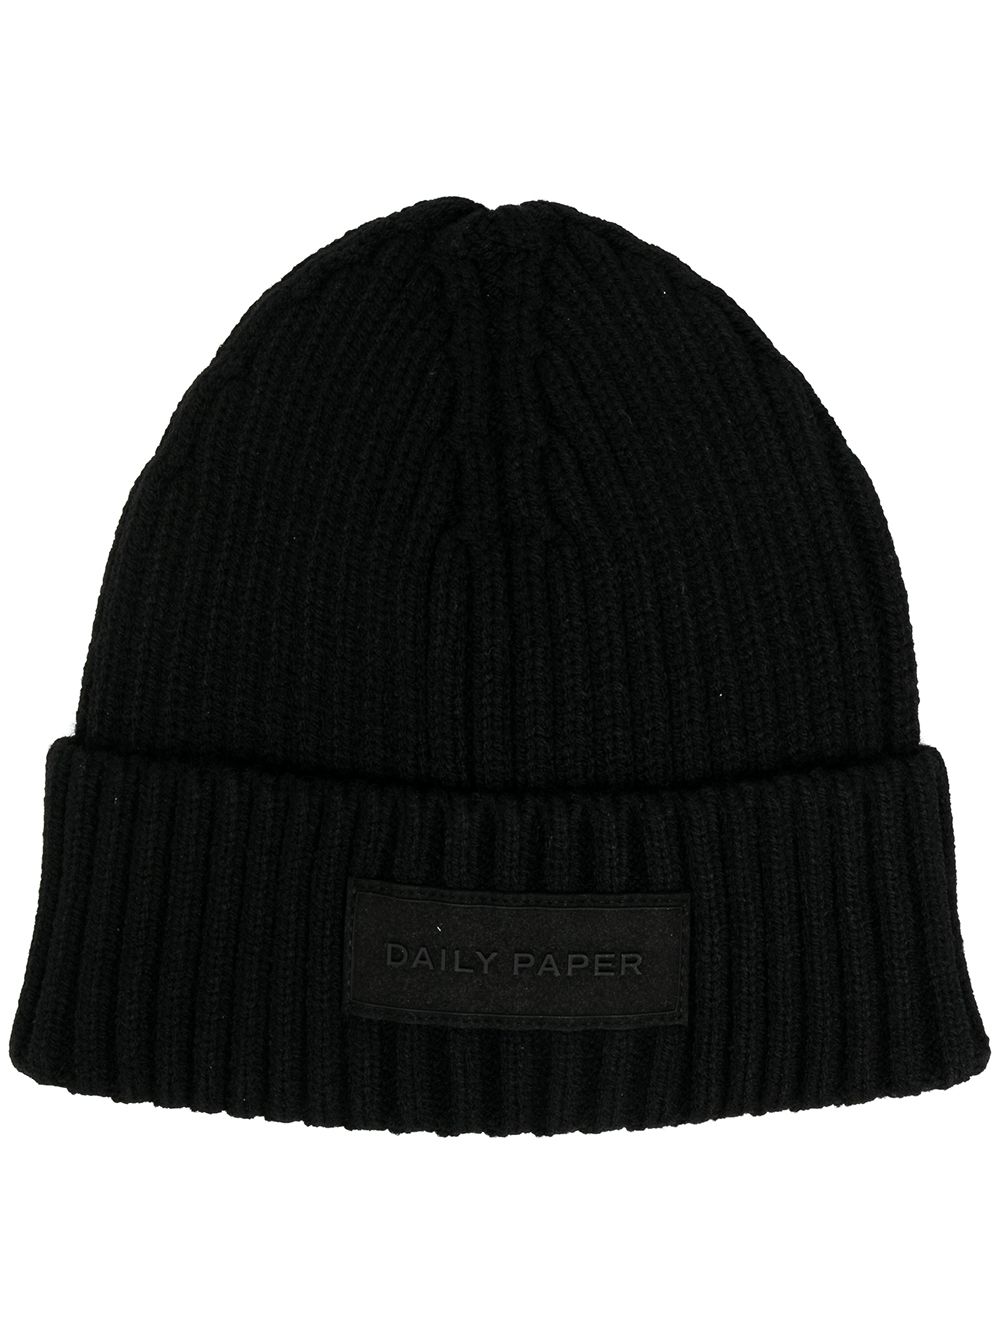 DAILY PAPER LOGO PATCH BEANIE